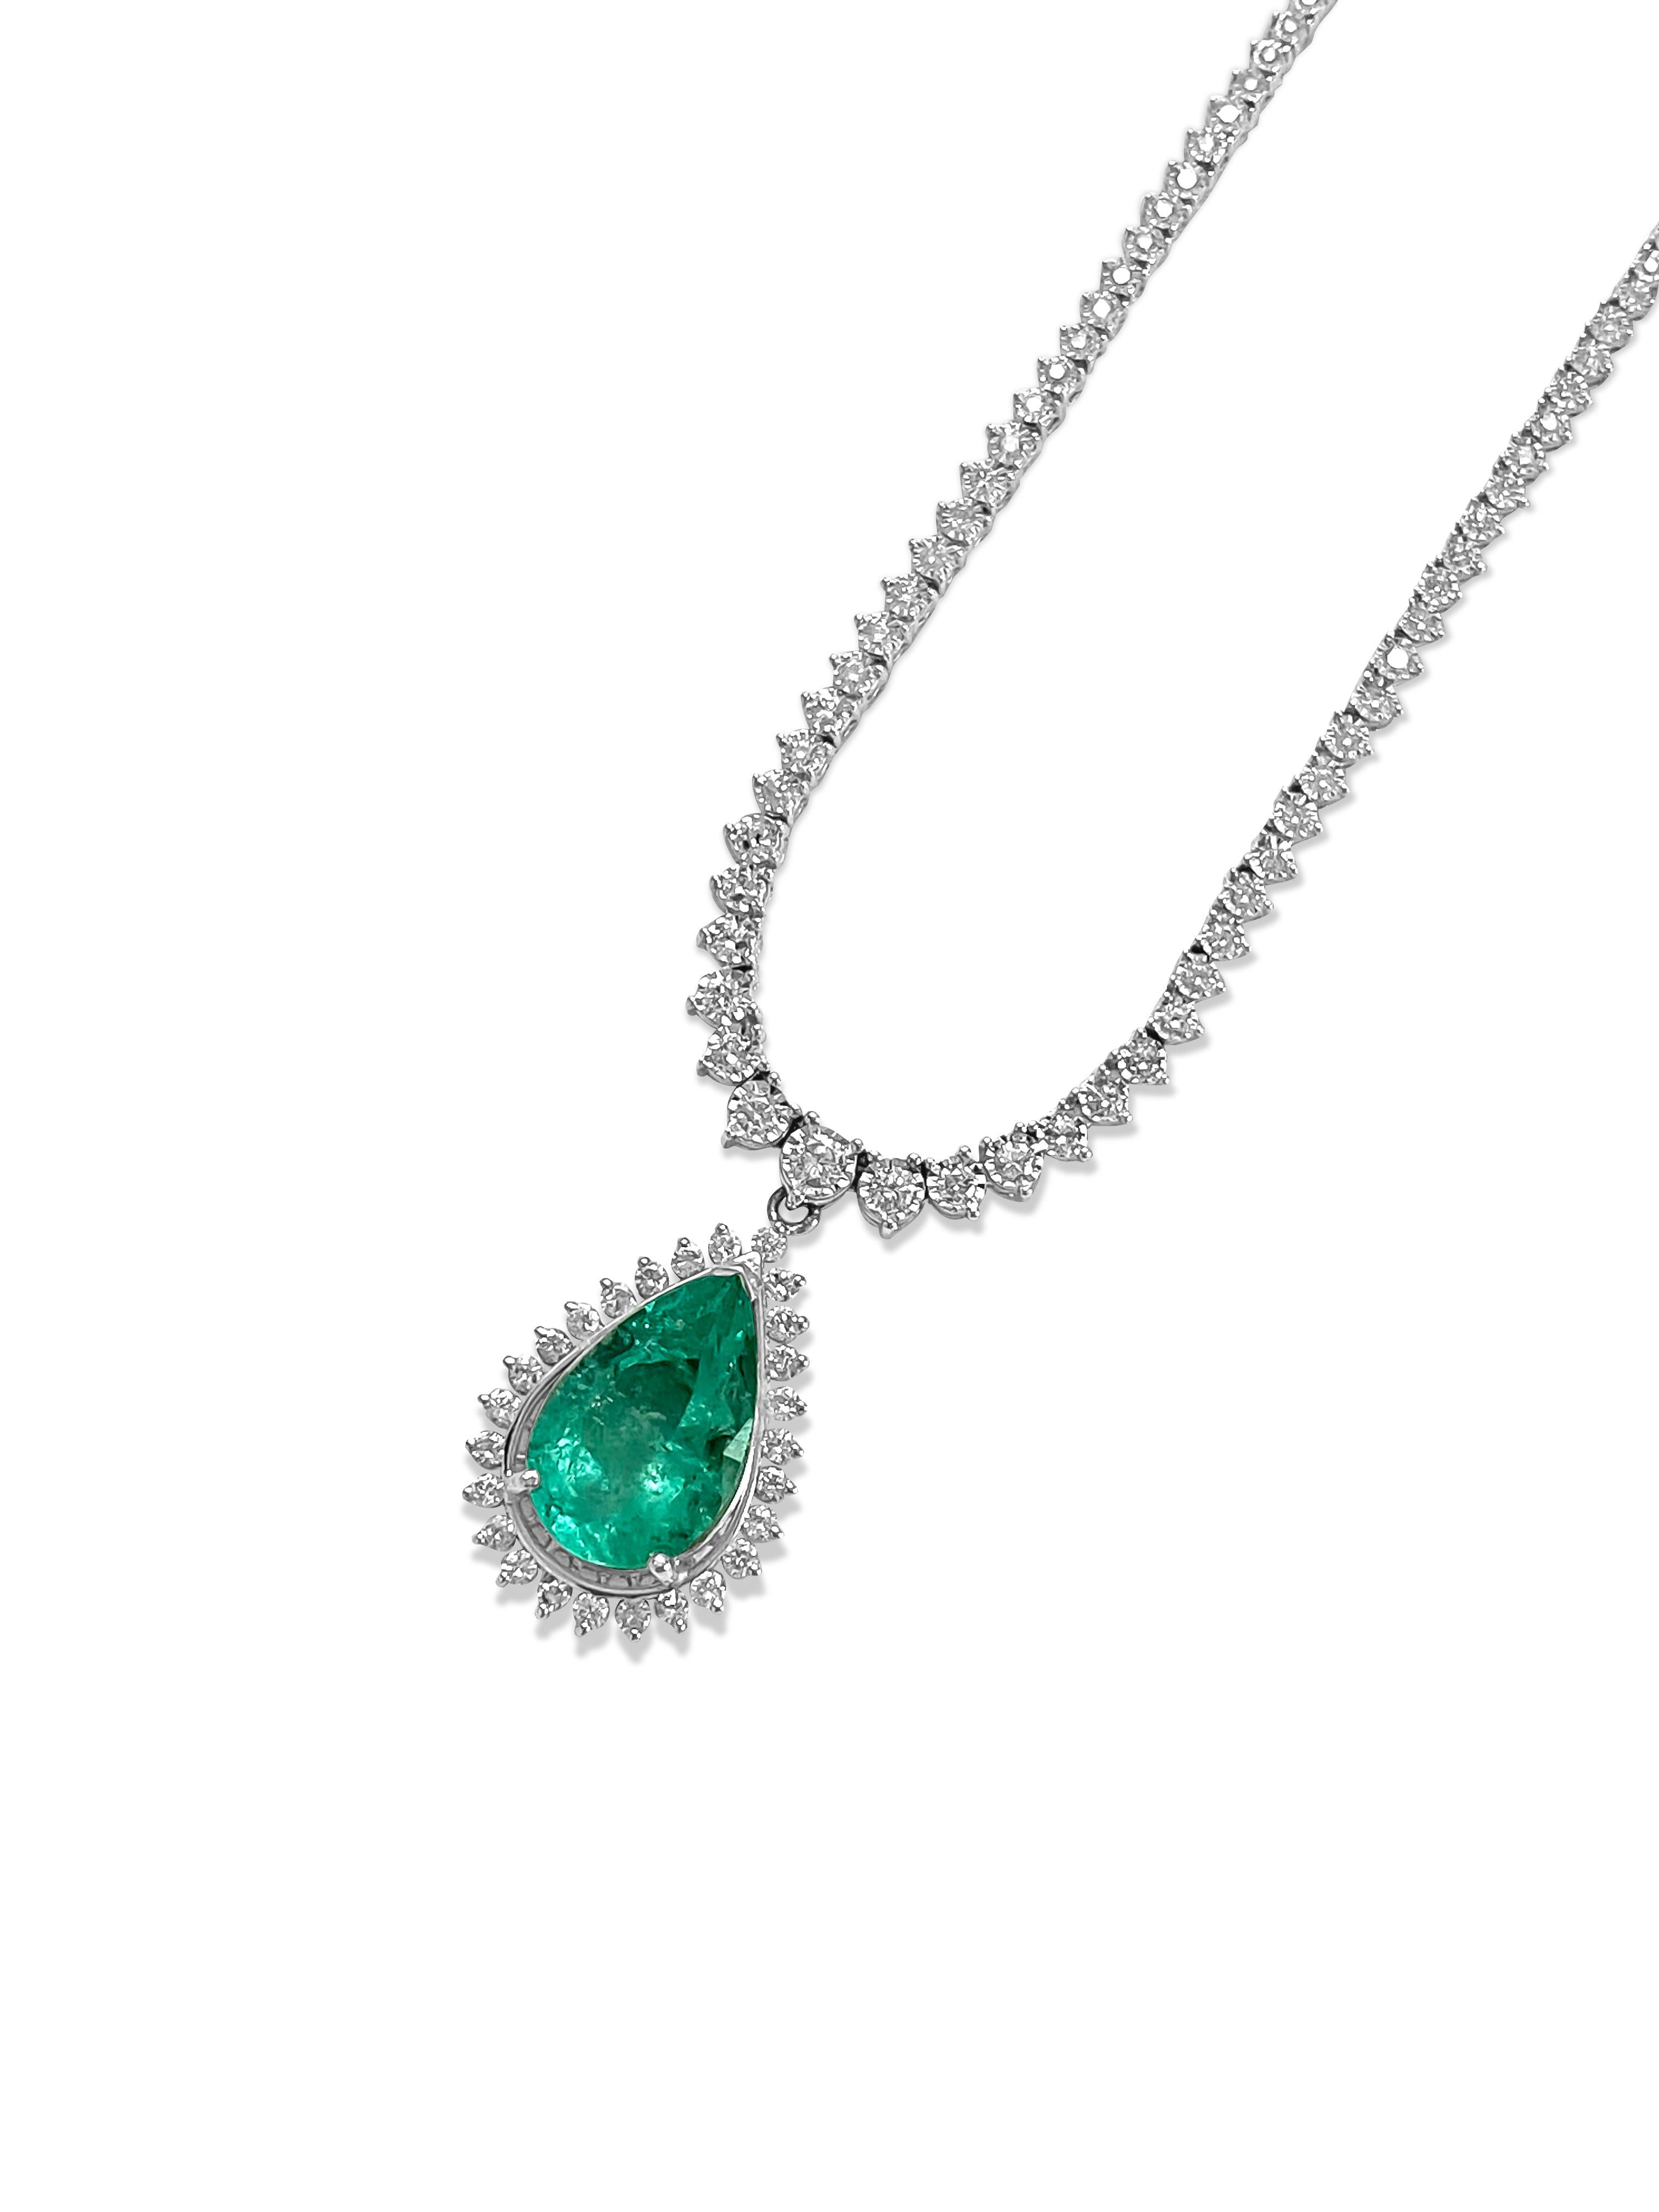 Contemporary Certified 12.00ct Colombian Emerald Diamond Necklace For Sale